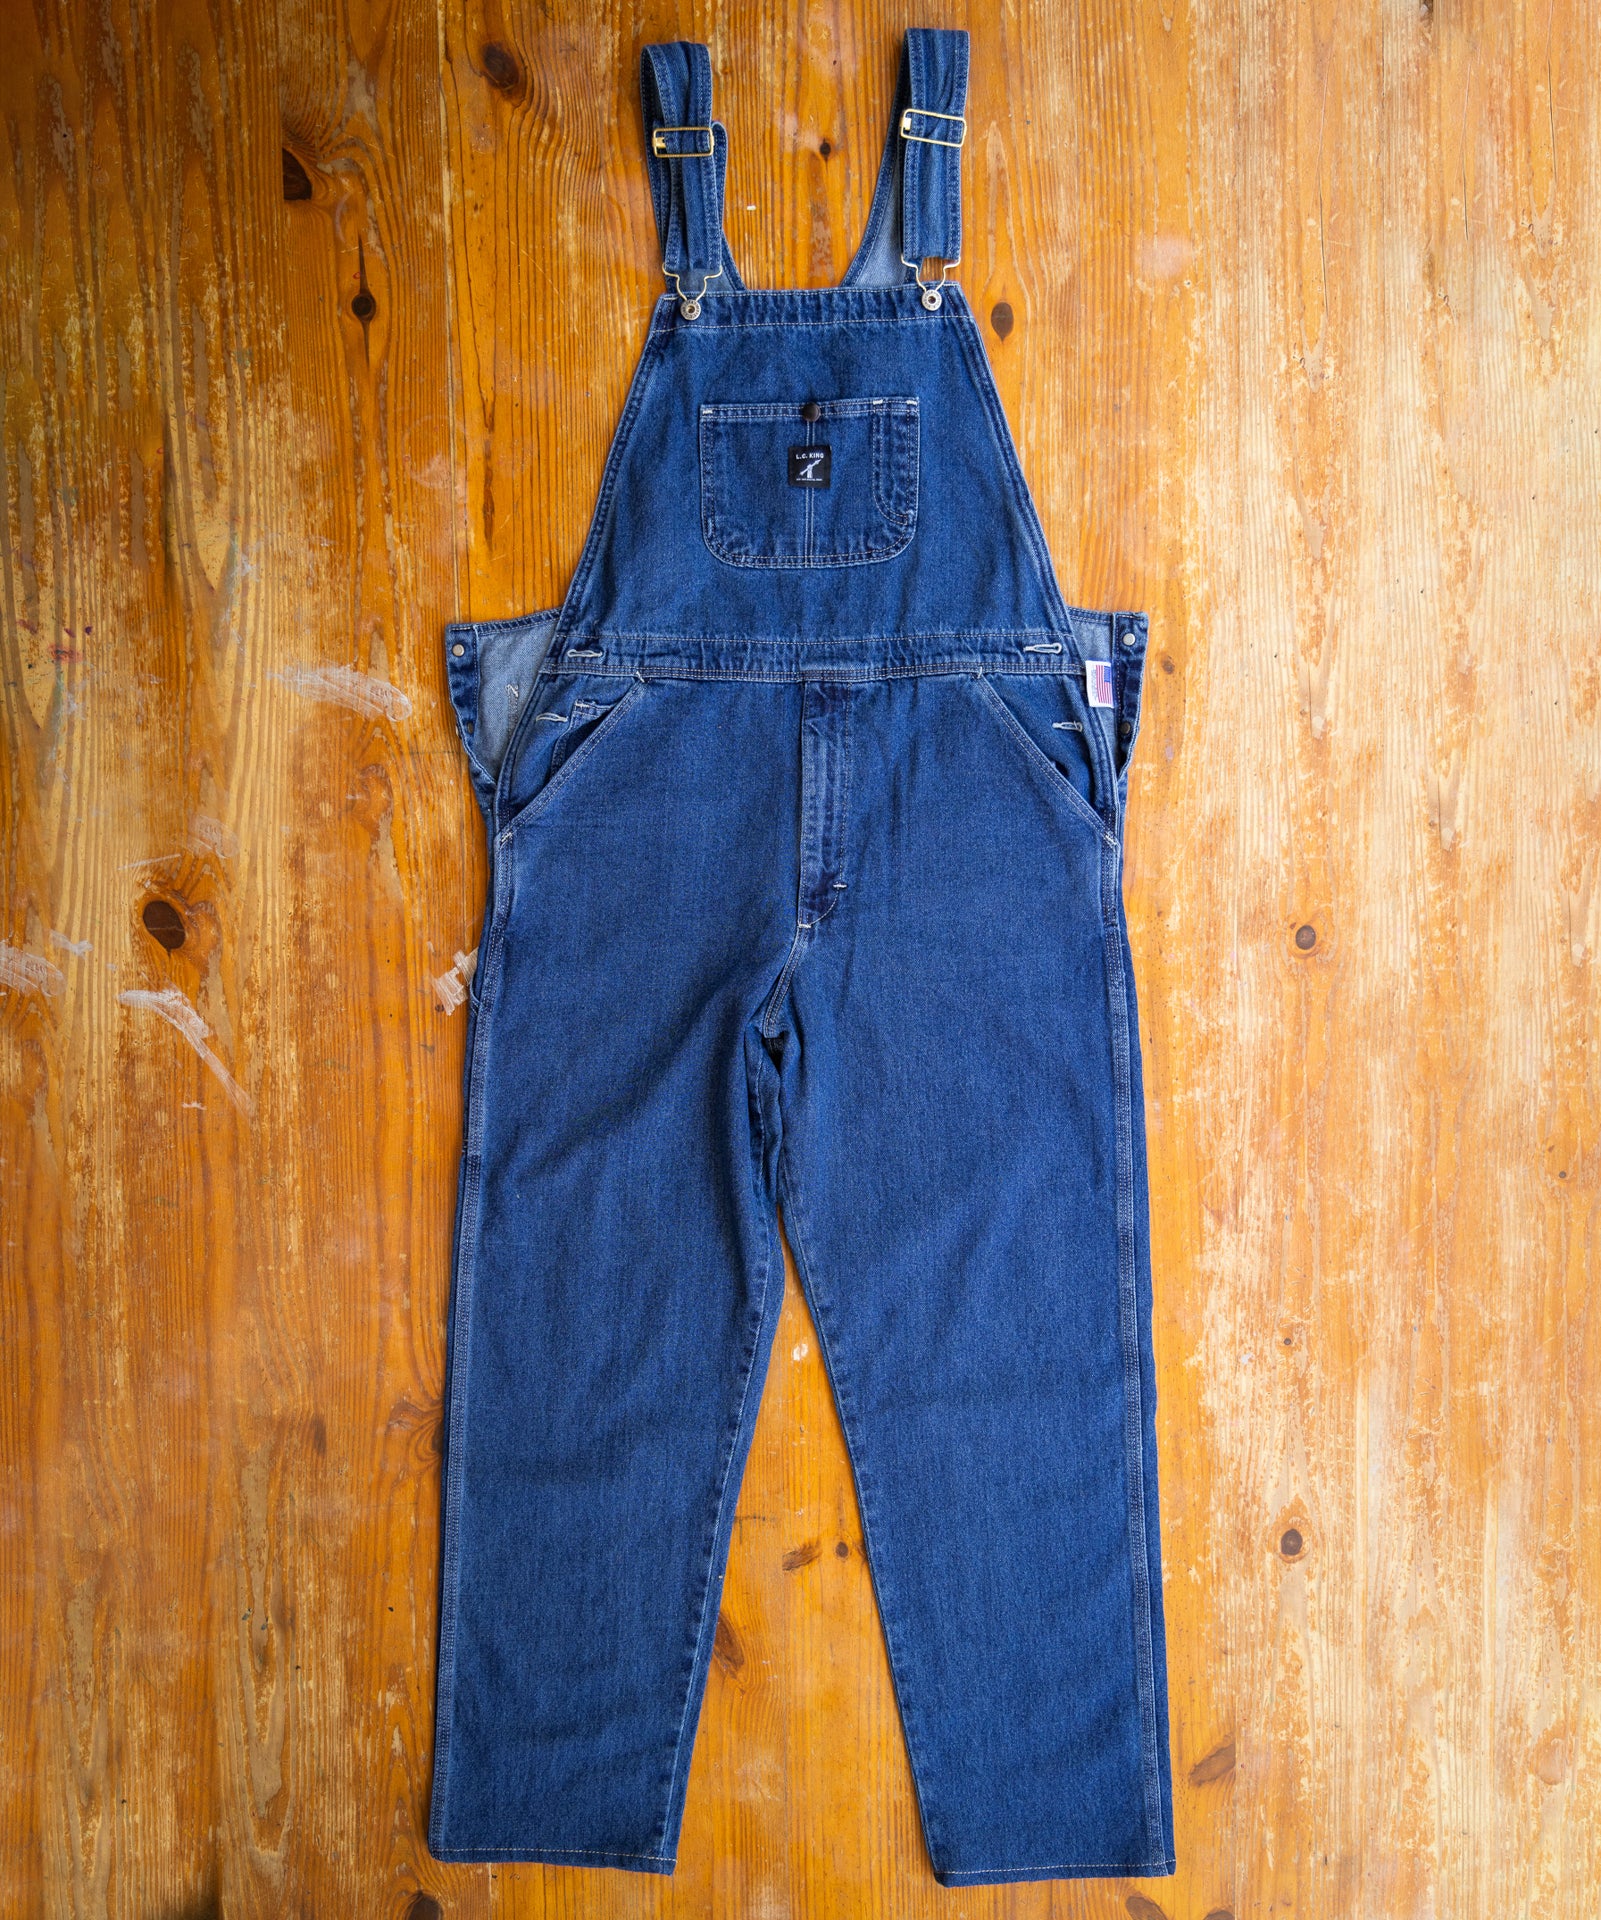 LC King Indigo Denim Tailored Fit High Back Overalls - Washed – LC King Mfg